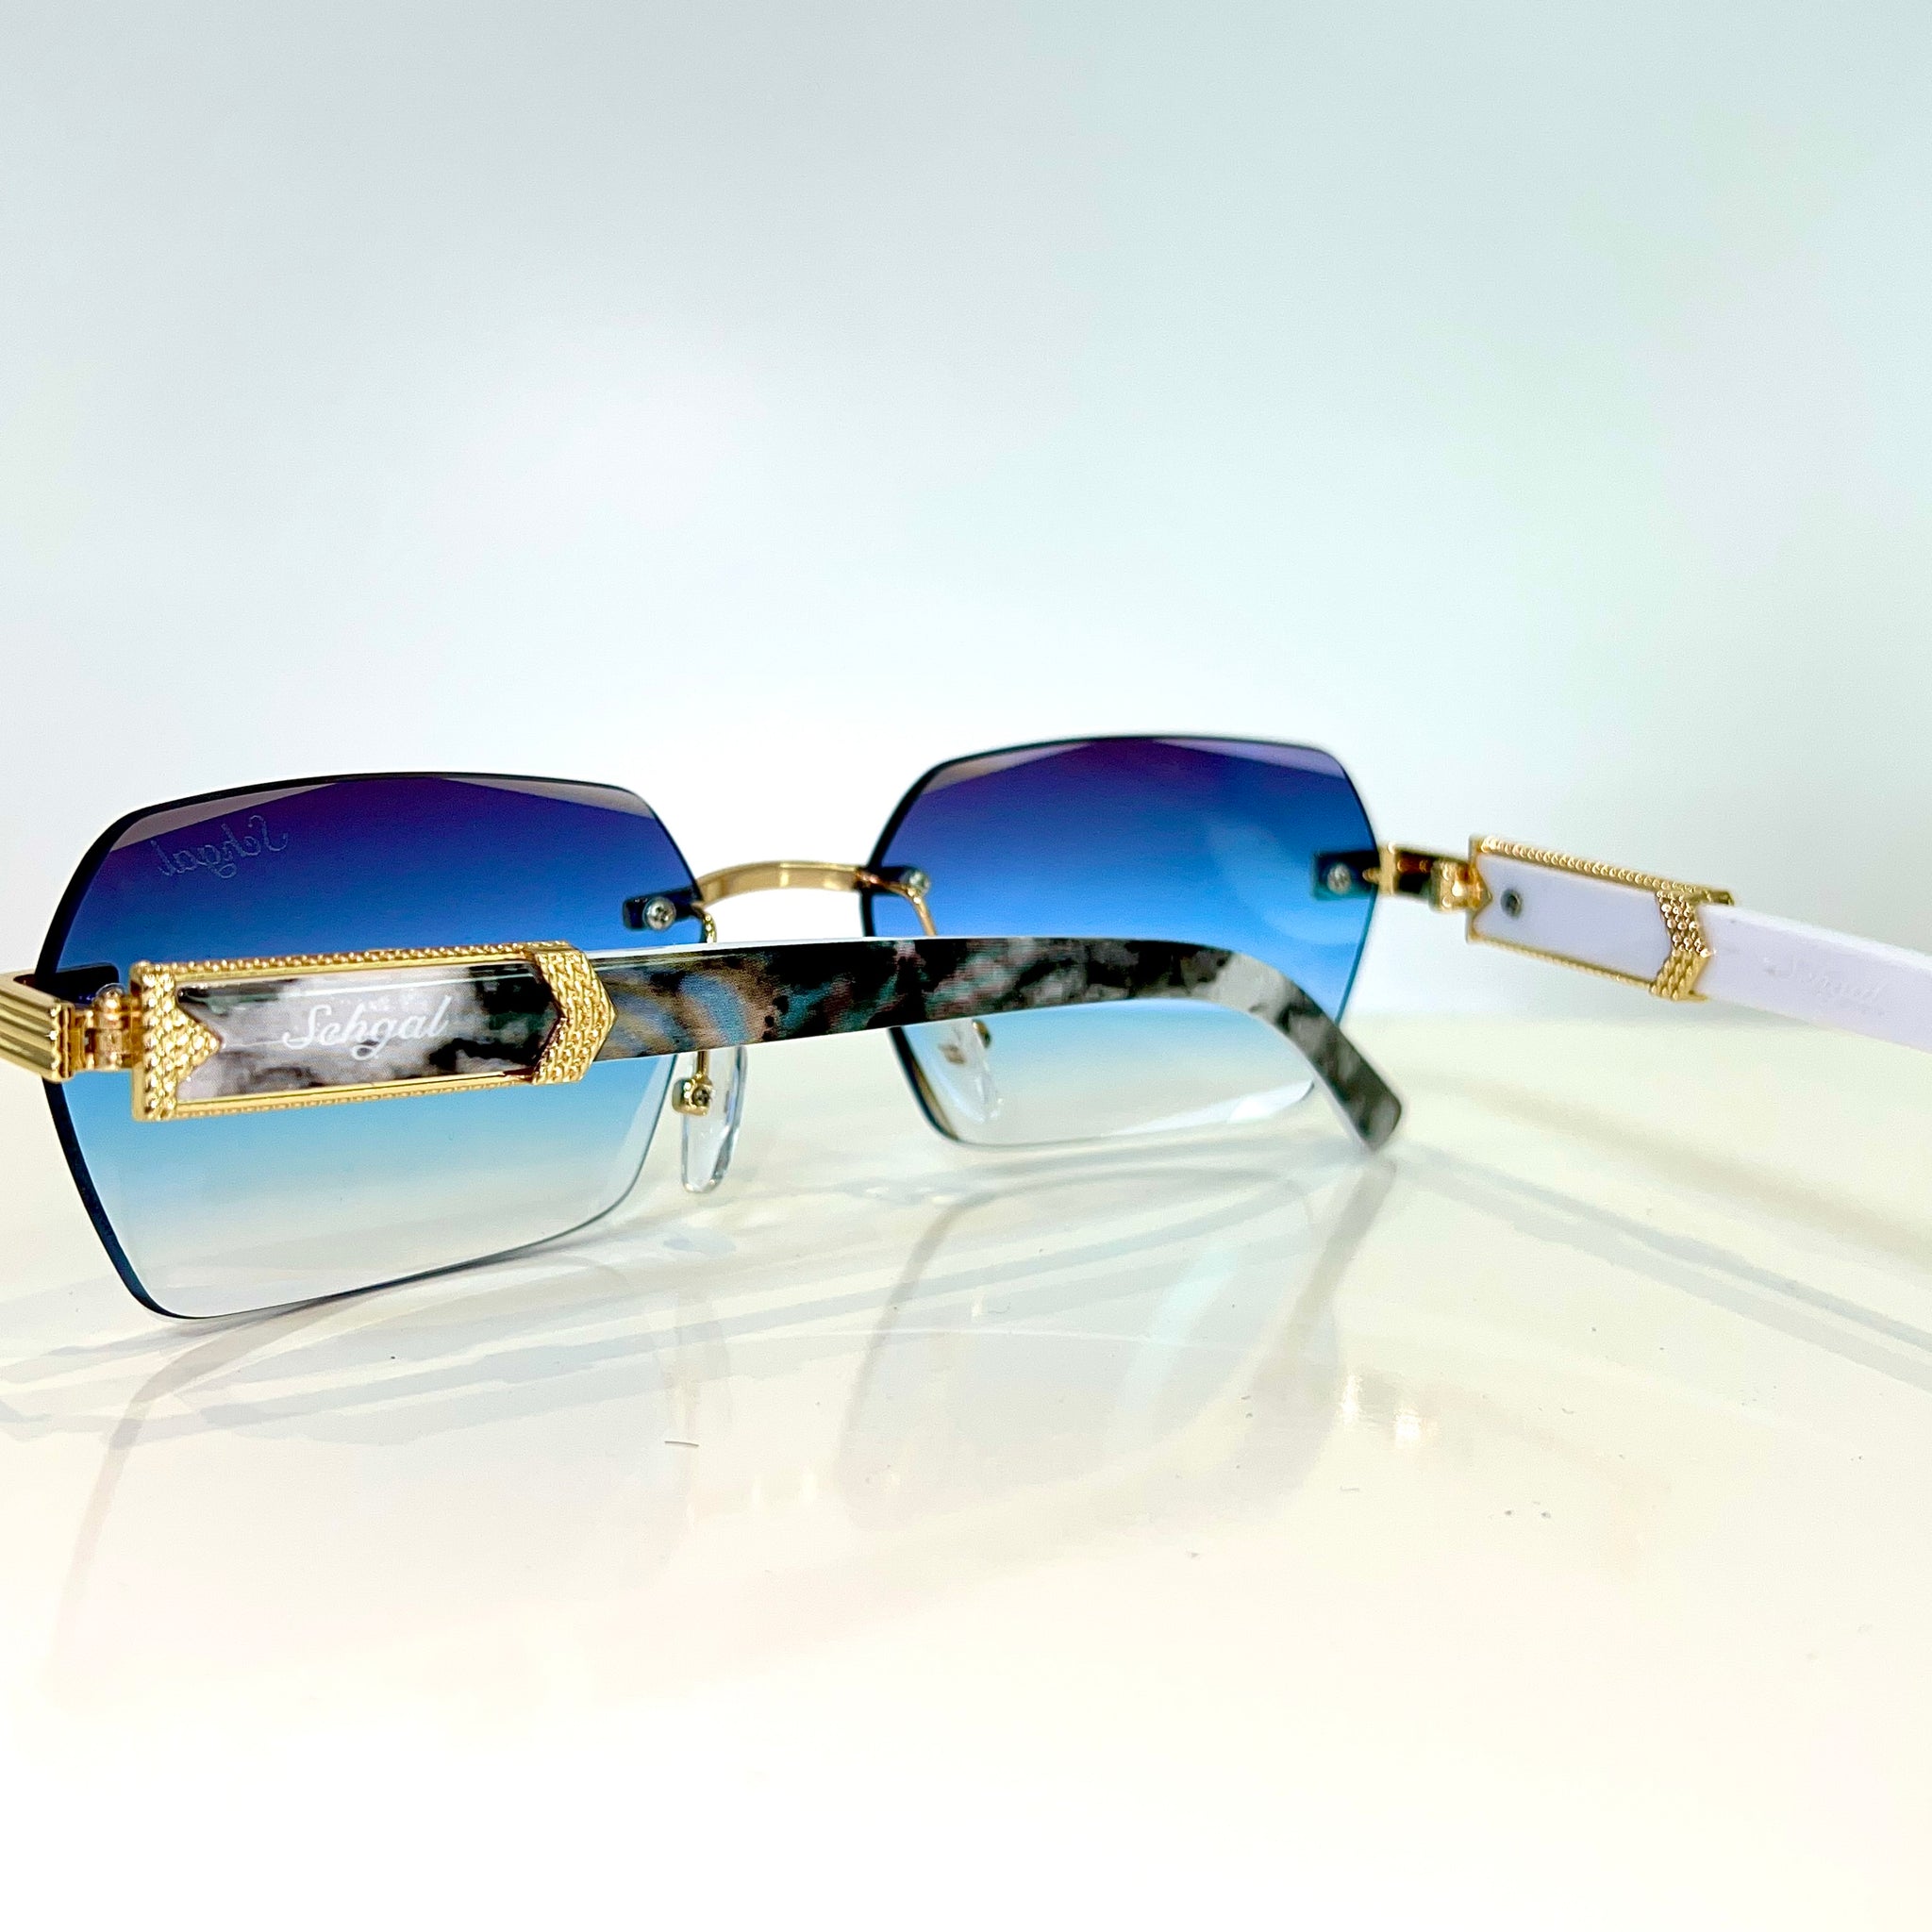 Marblecut Glasses - 14 carat gold plated - Blue Shade